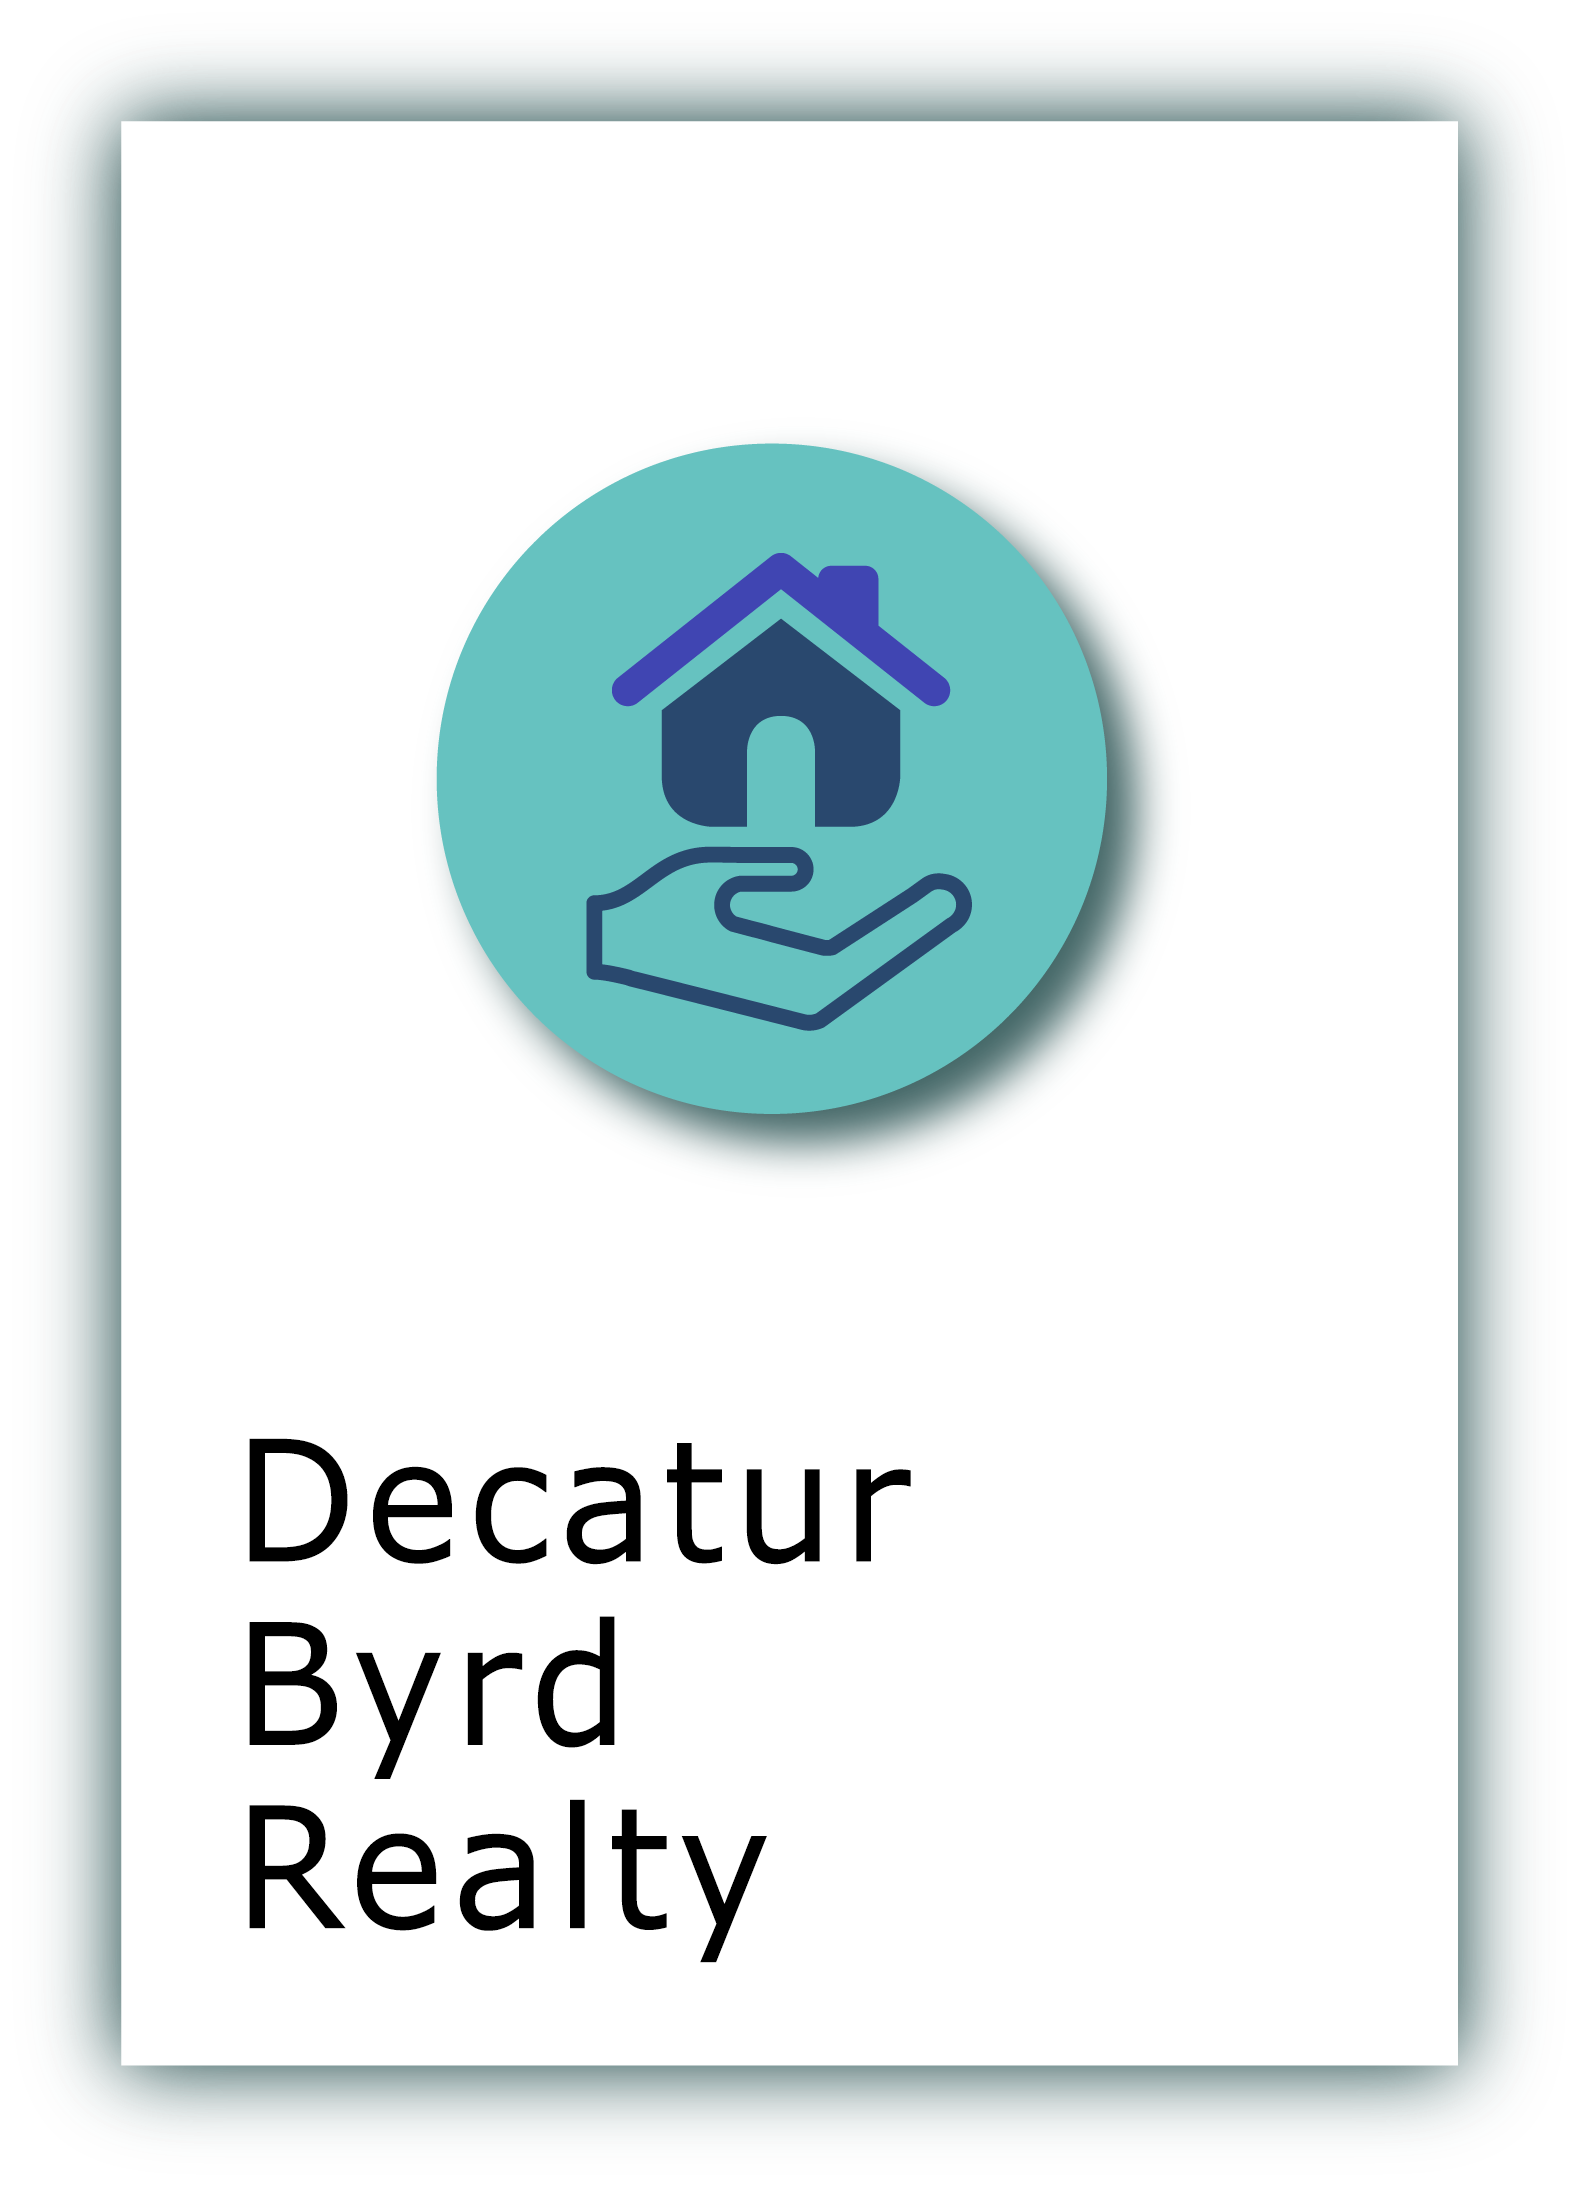 Decatur Byrd Realty